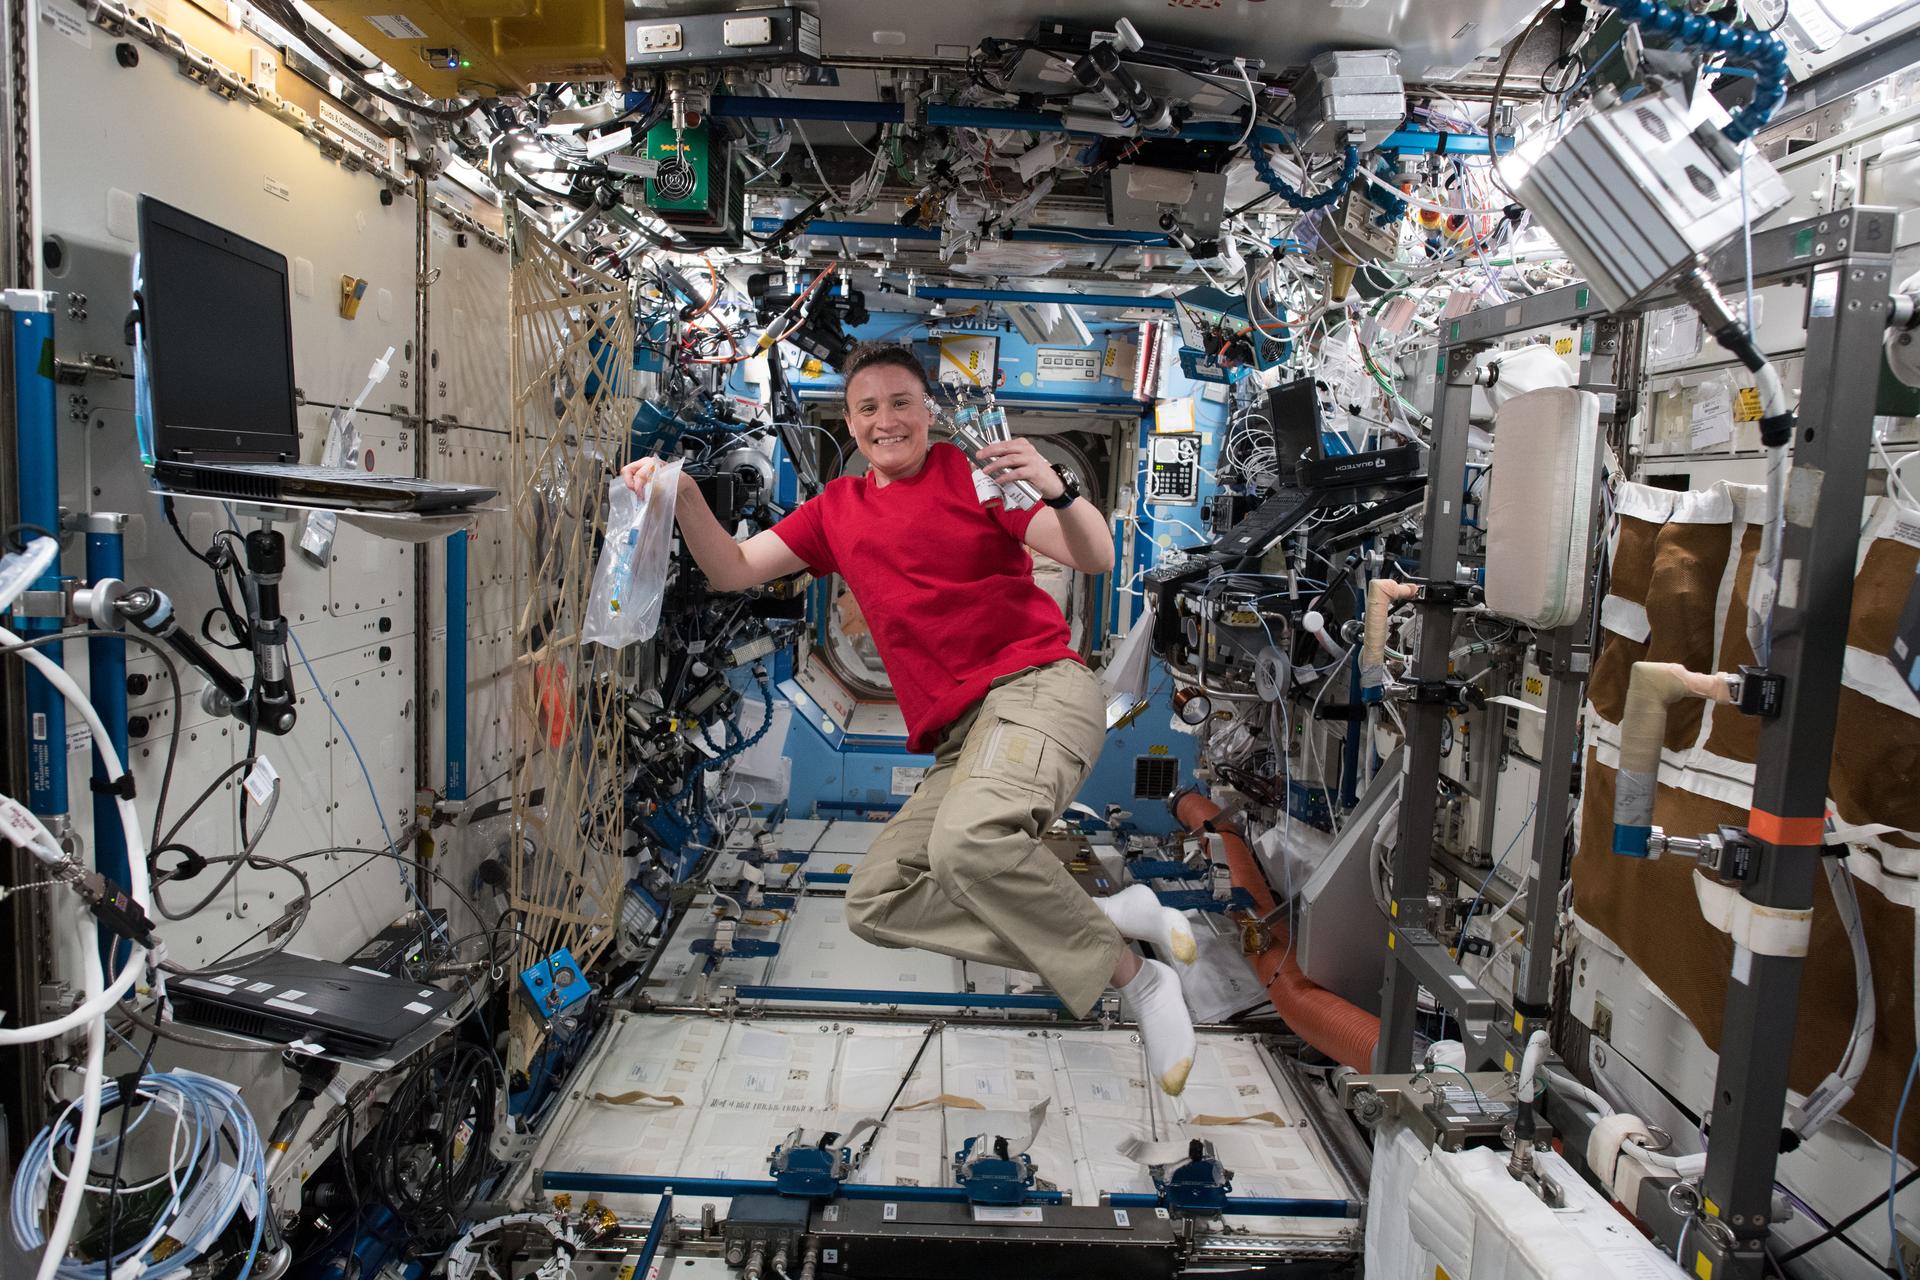 Expedition 56 Flight Engineer Serena Auñón-Chancellor of NASA is pictured in the Destiny laboratory module